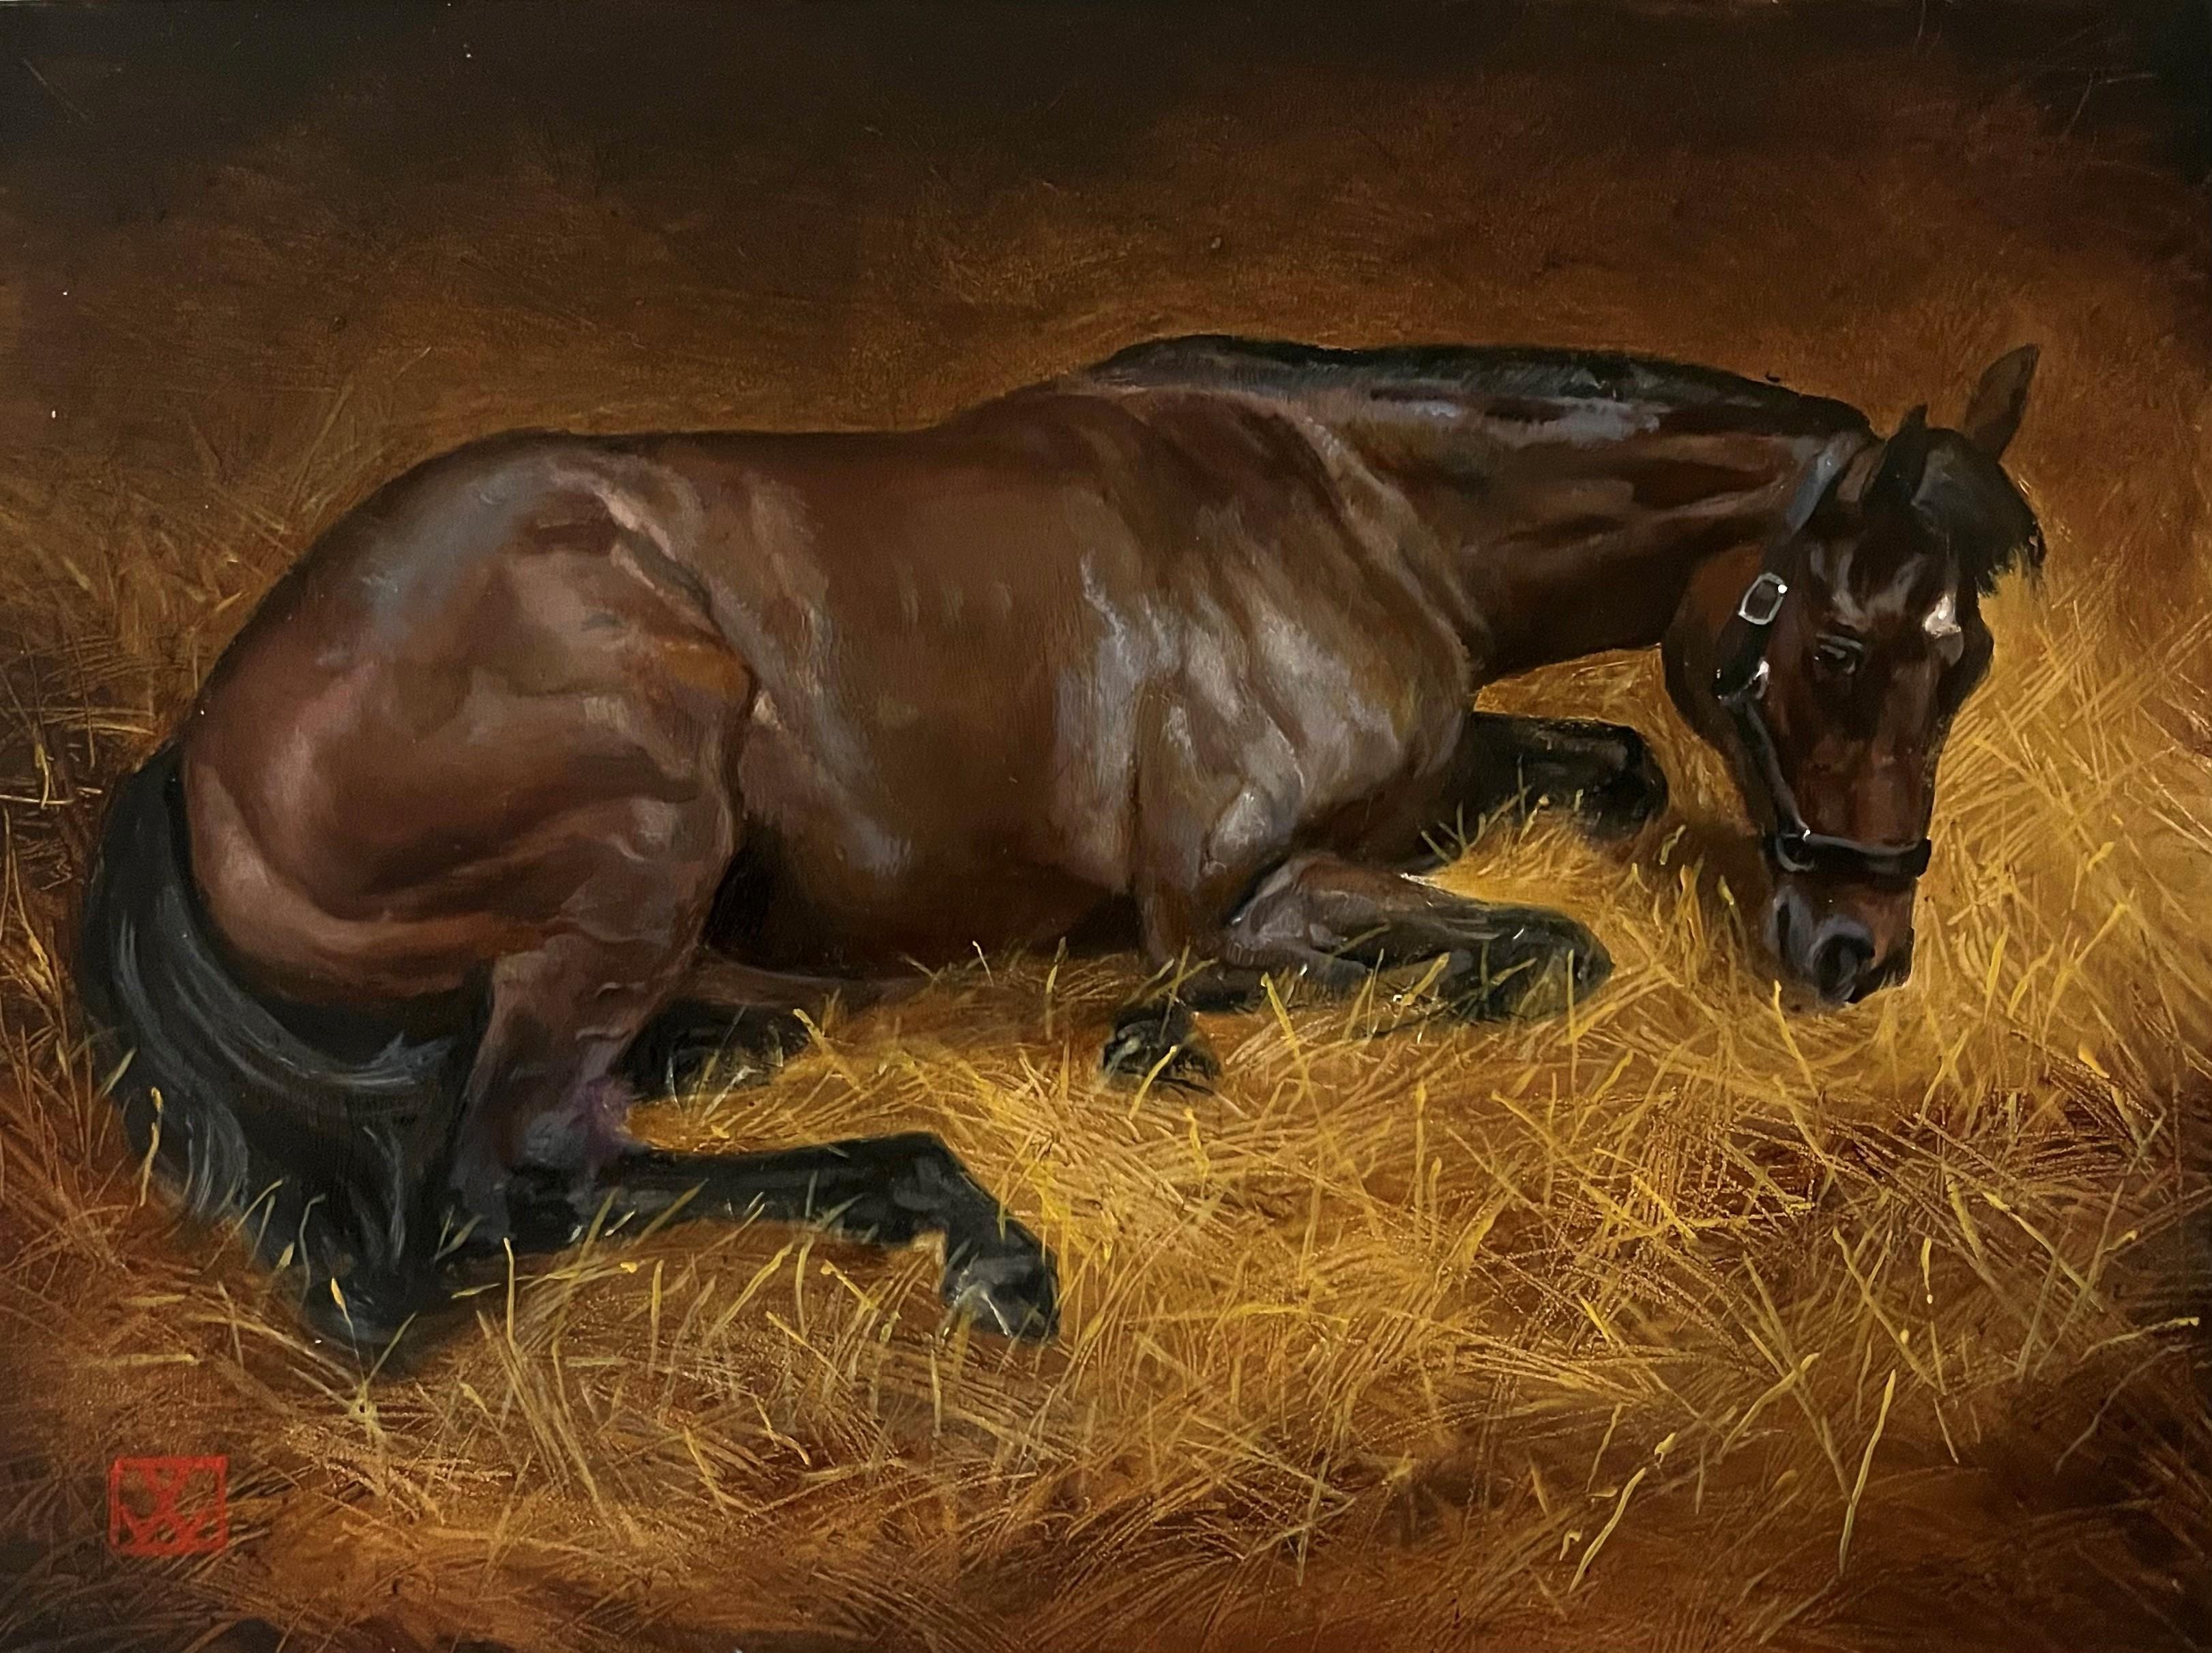 Valarie Wolf Portrait Painting - Painting of a Horse Waking up after a Comfortable Snooze in A Cozy Sunlit Stall 